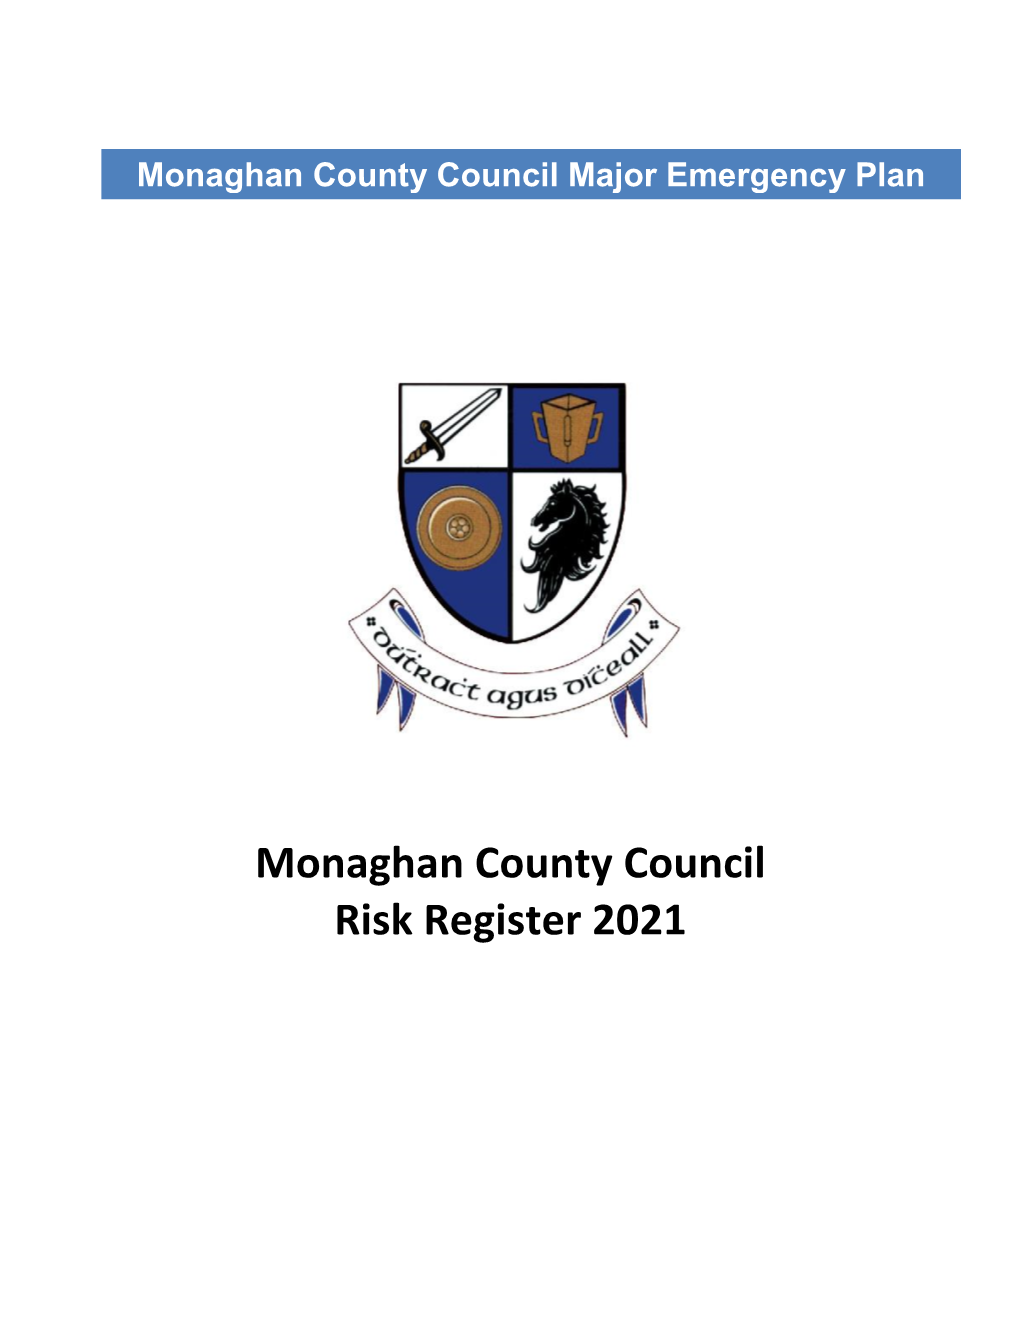 Monaghan County Council Risk Register